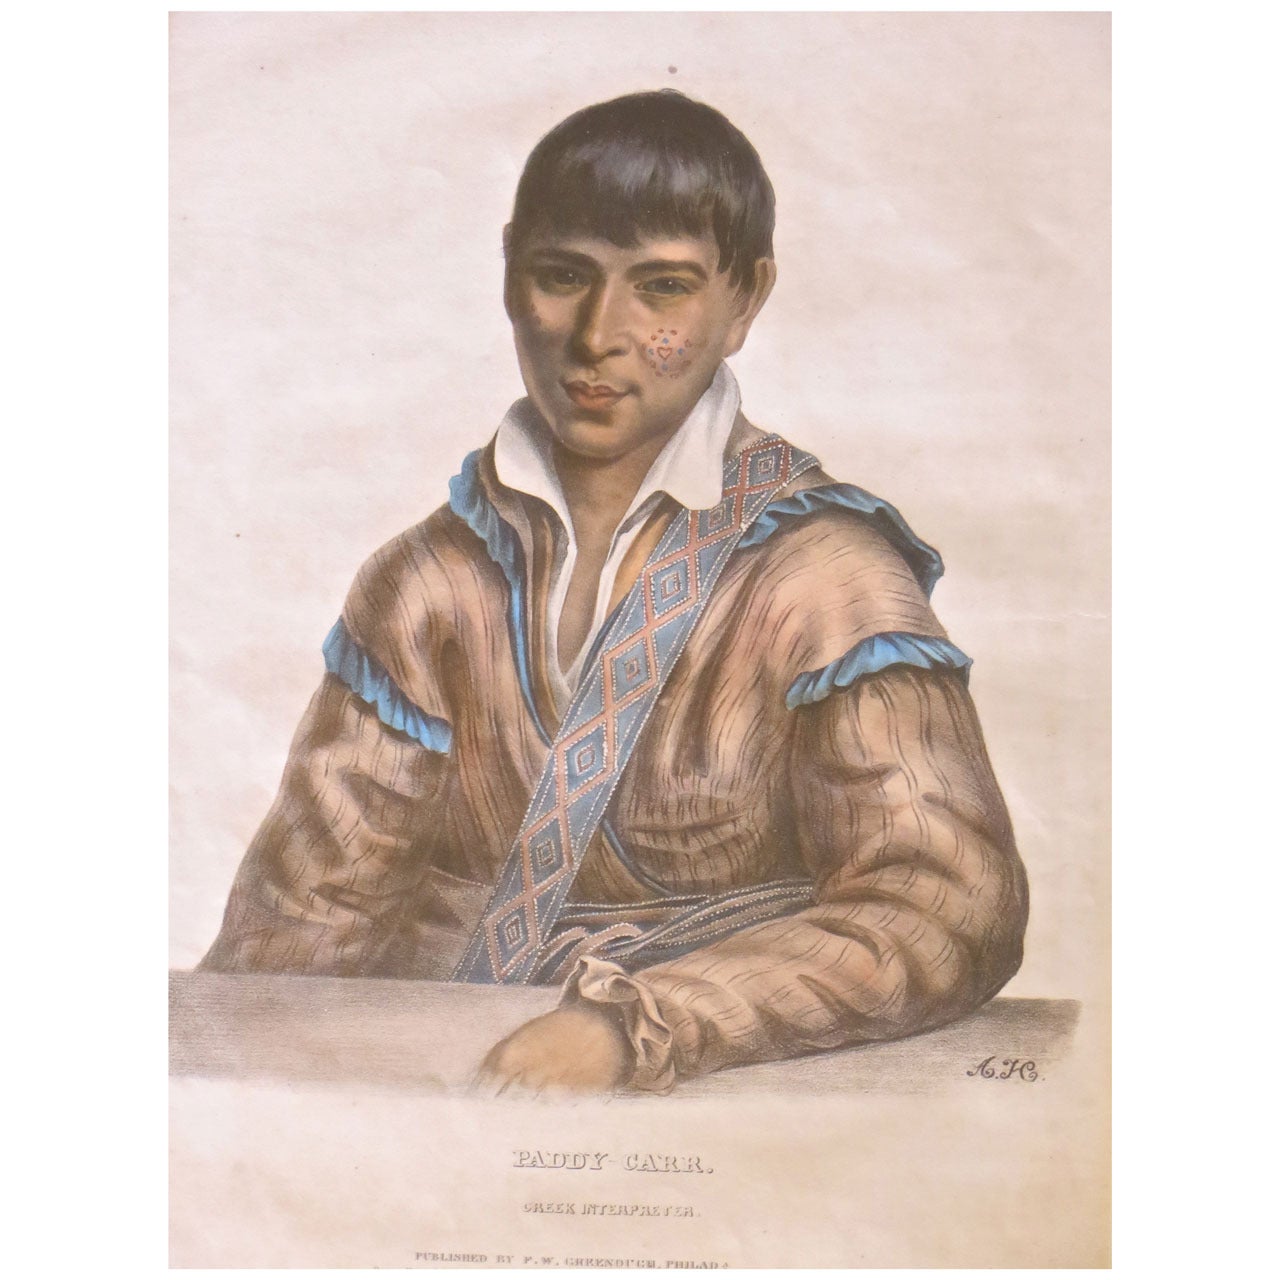 Mckenny and Hall Hand-Painted Lithograph "Paddy-Carr Creek Interpreter", 1838